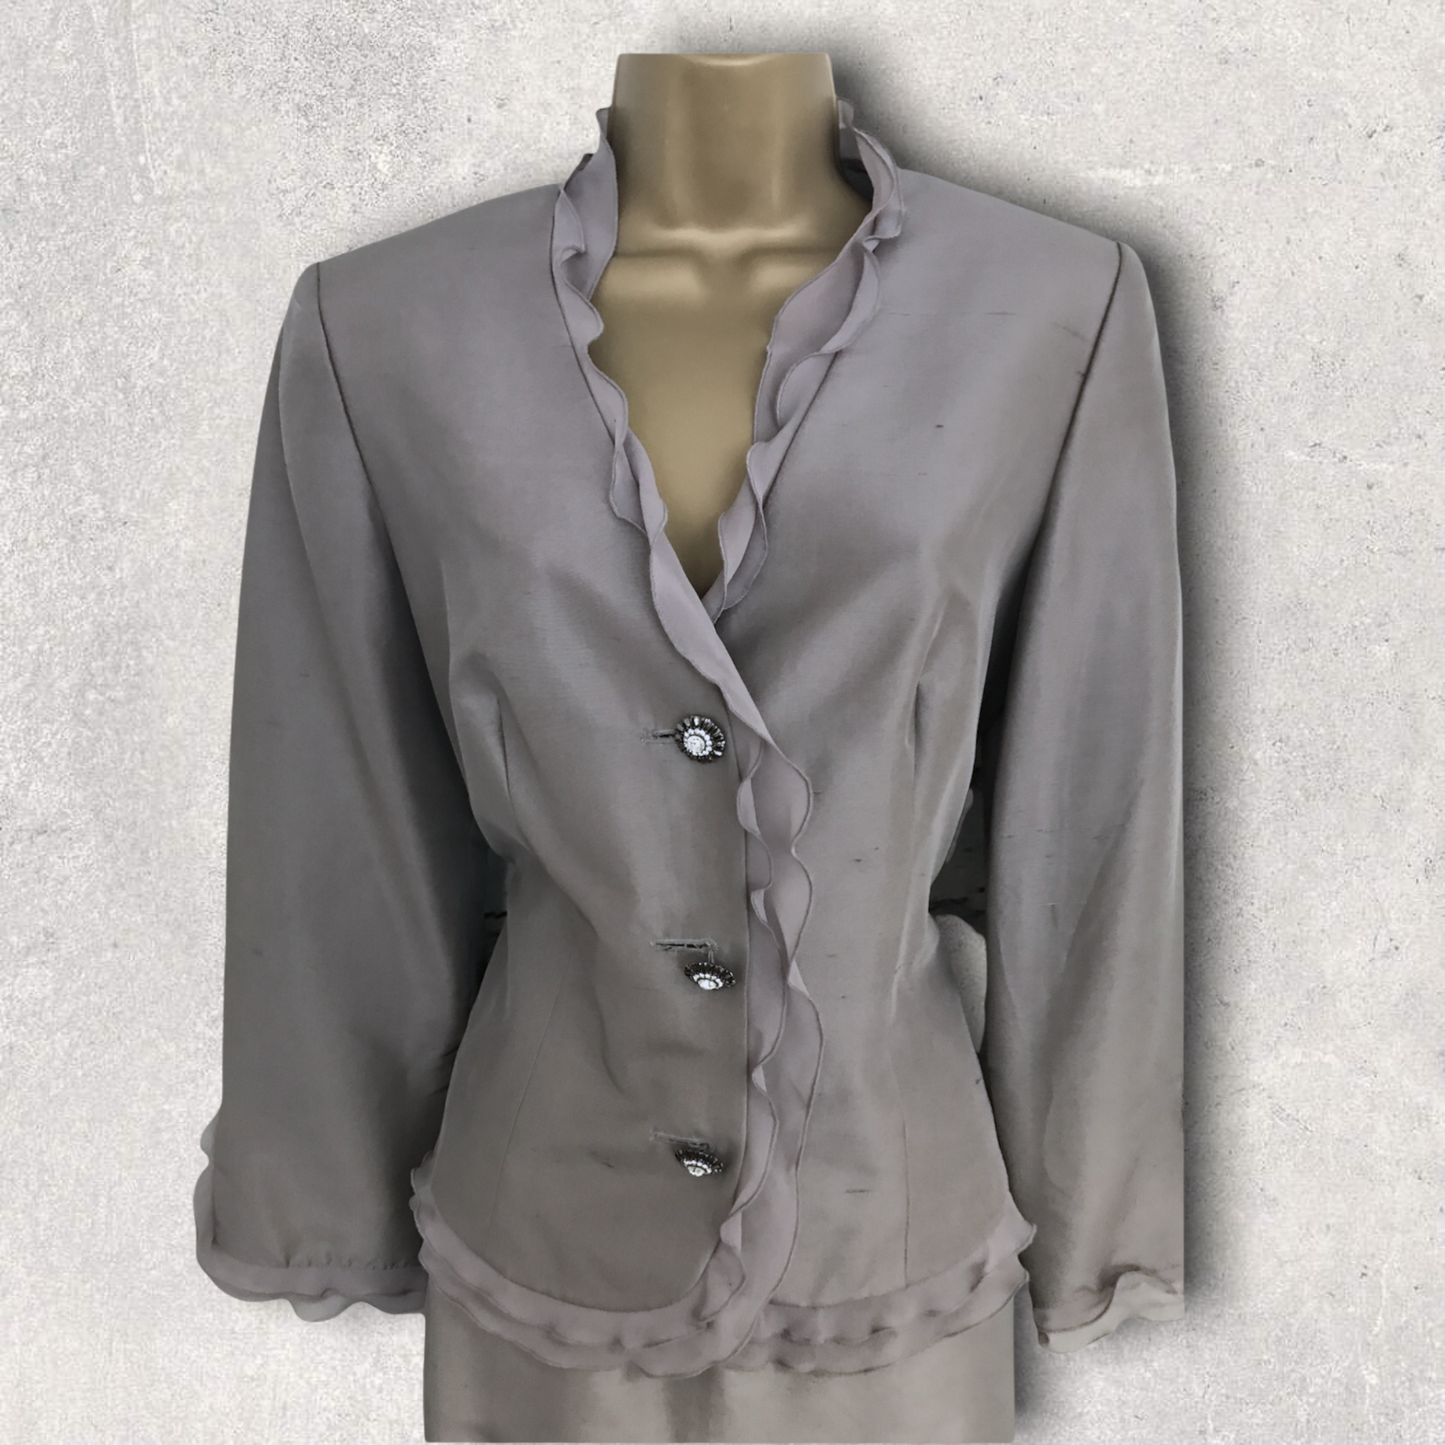 Medici Grey Silk Special Occasion Suit UK 10 US 6 EU 38 BNWT RRP £335.00 Timeless Fashions